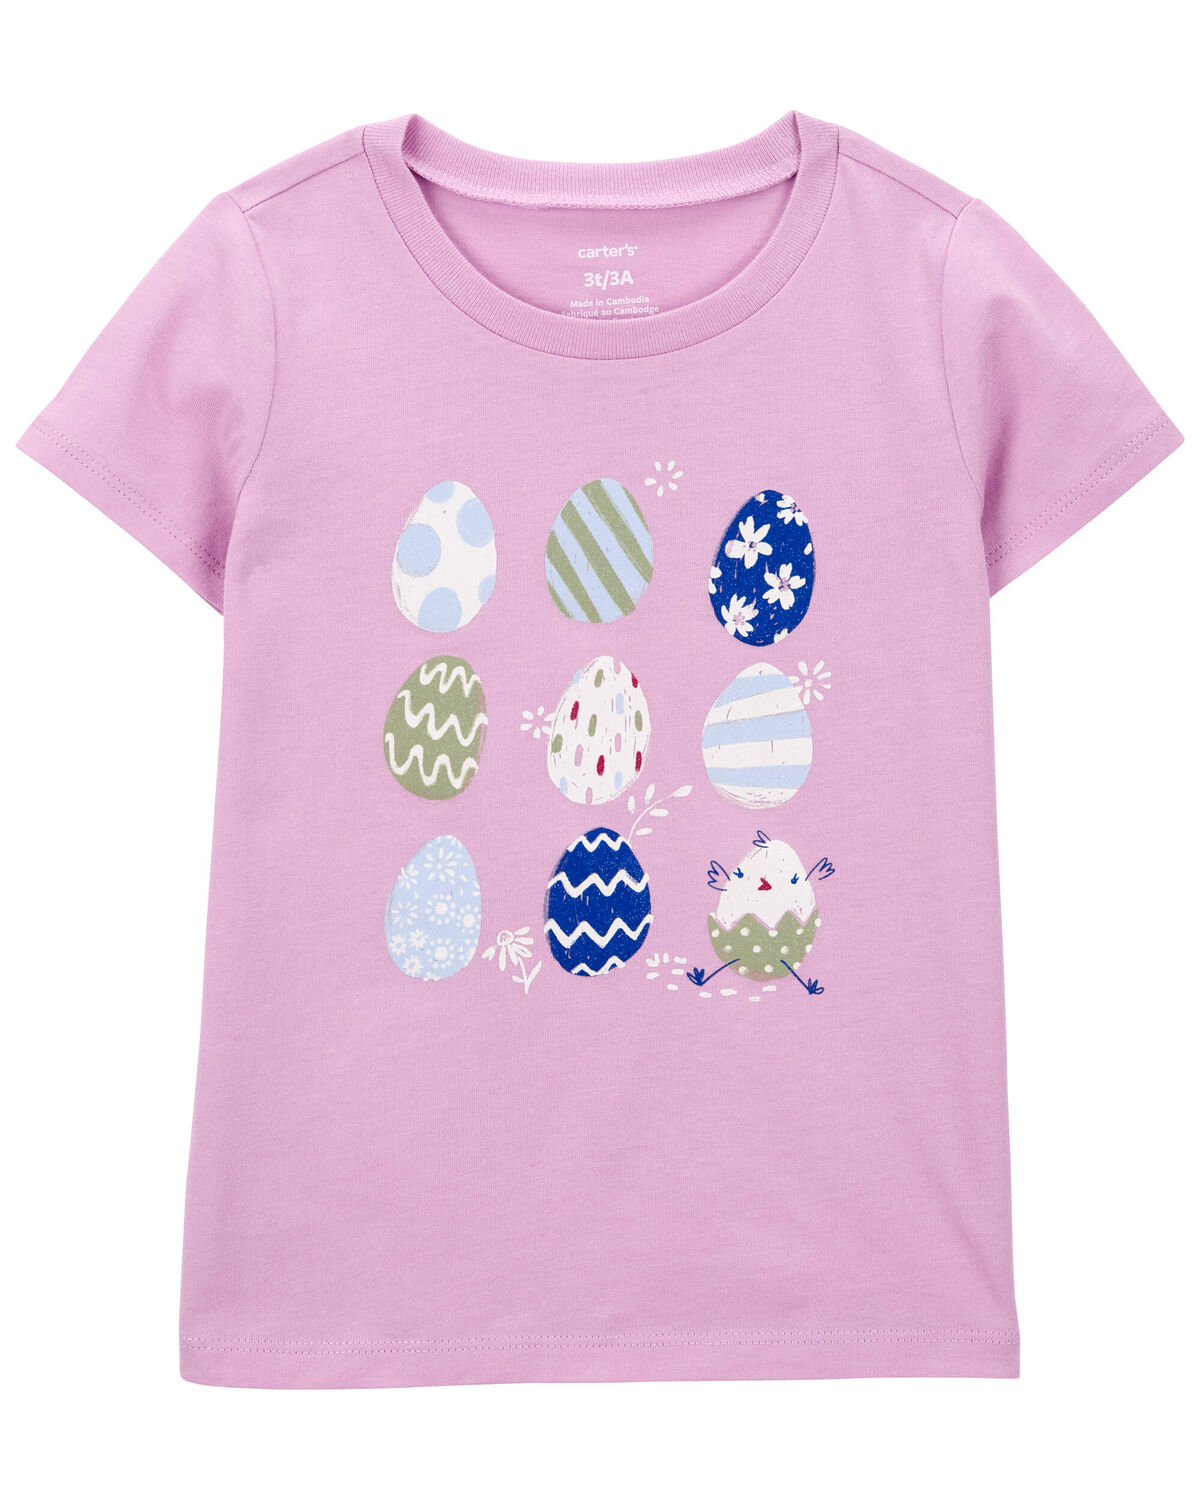 Toddler Easter Egg Graphic Tee